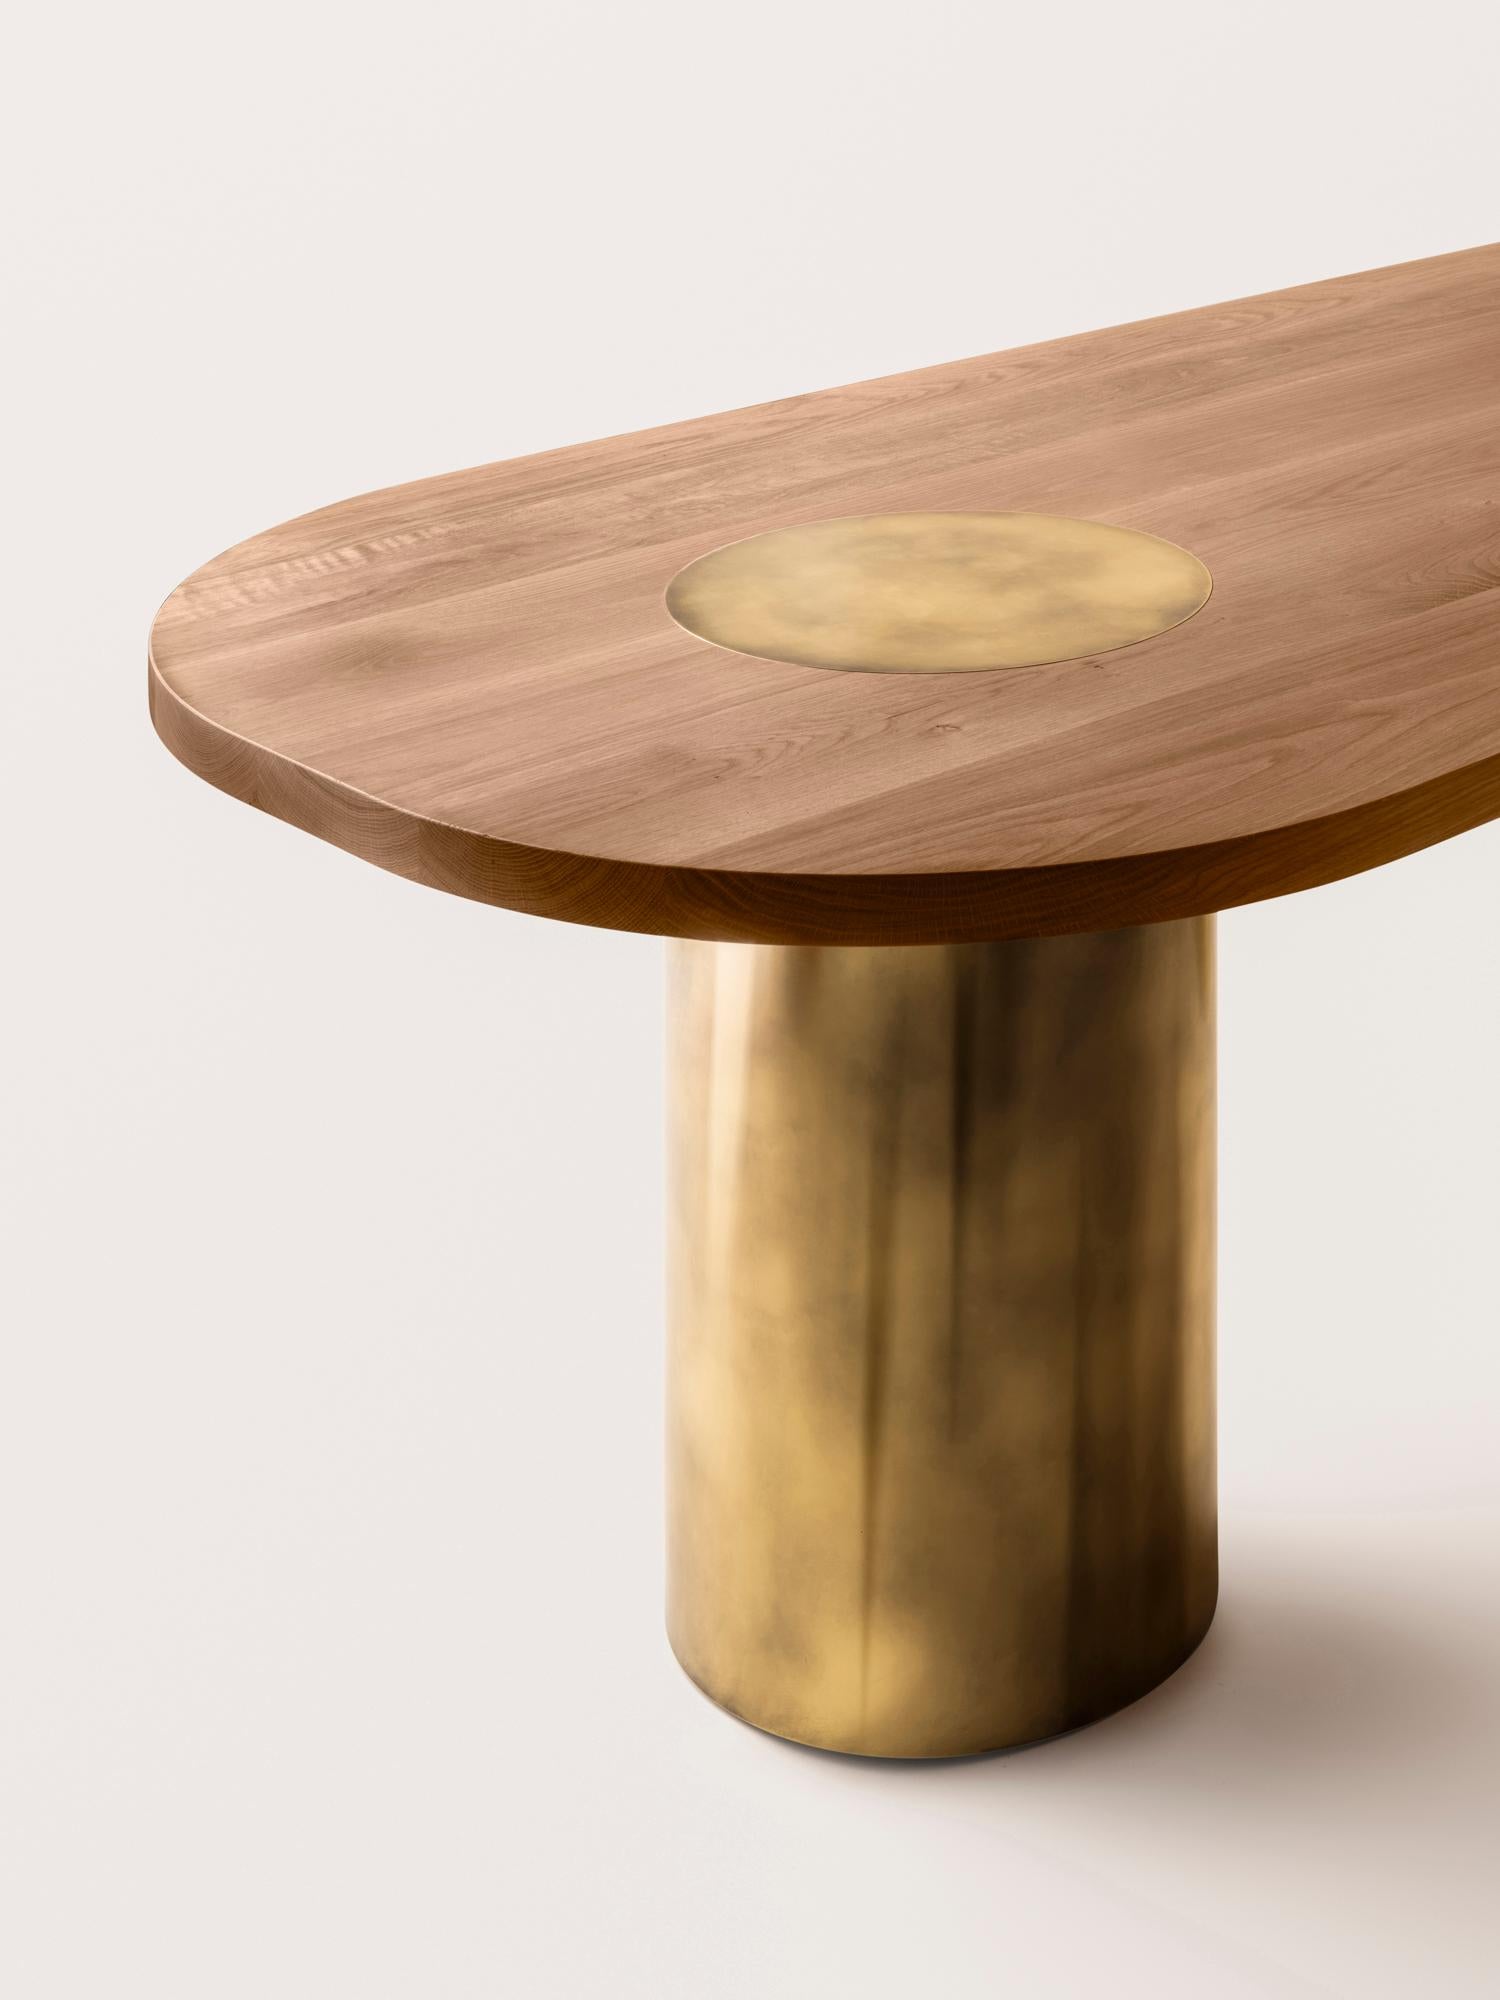 Silo Dining Table - Natural Oak and Burnished Brass In New Condition For Sale In New York, NY